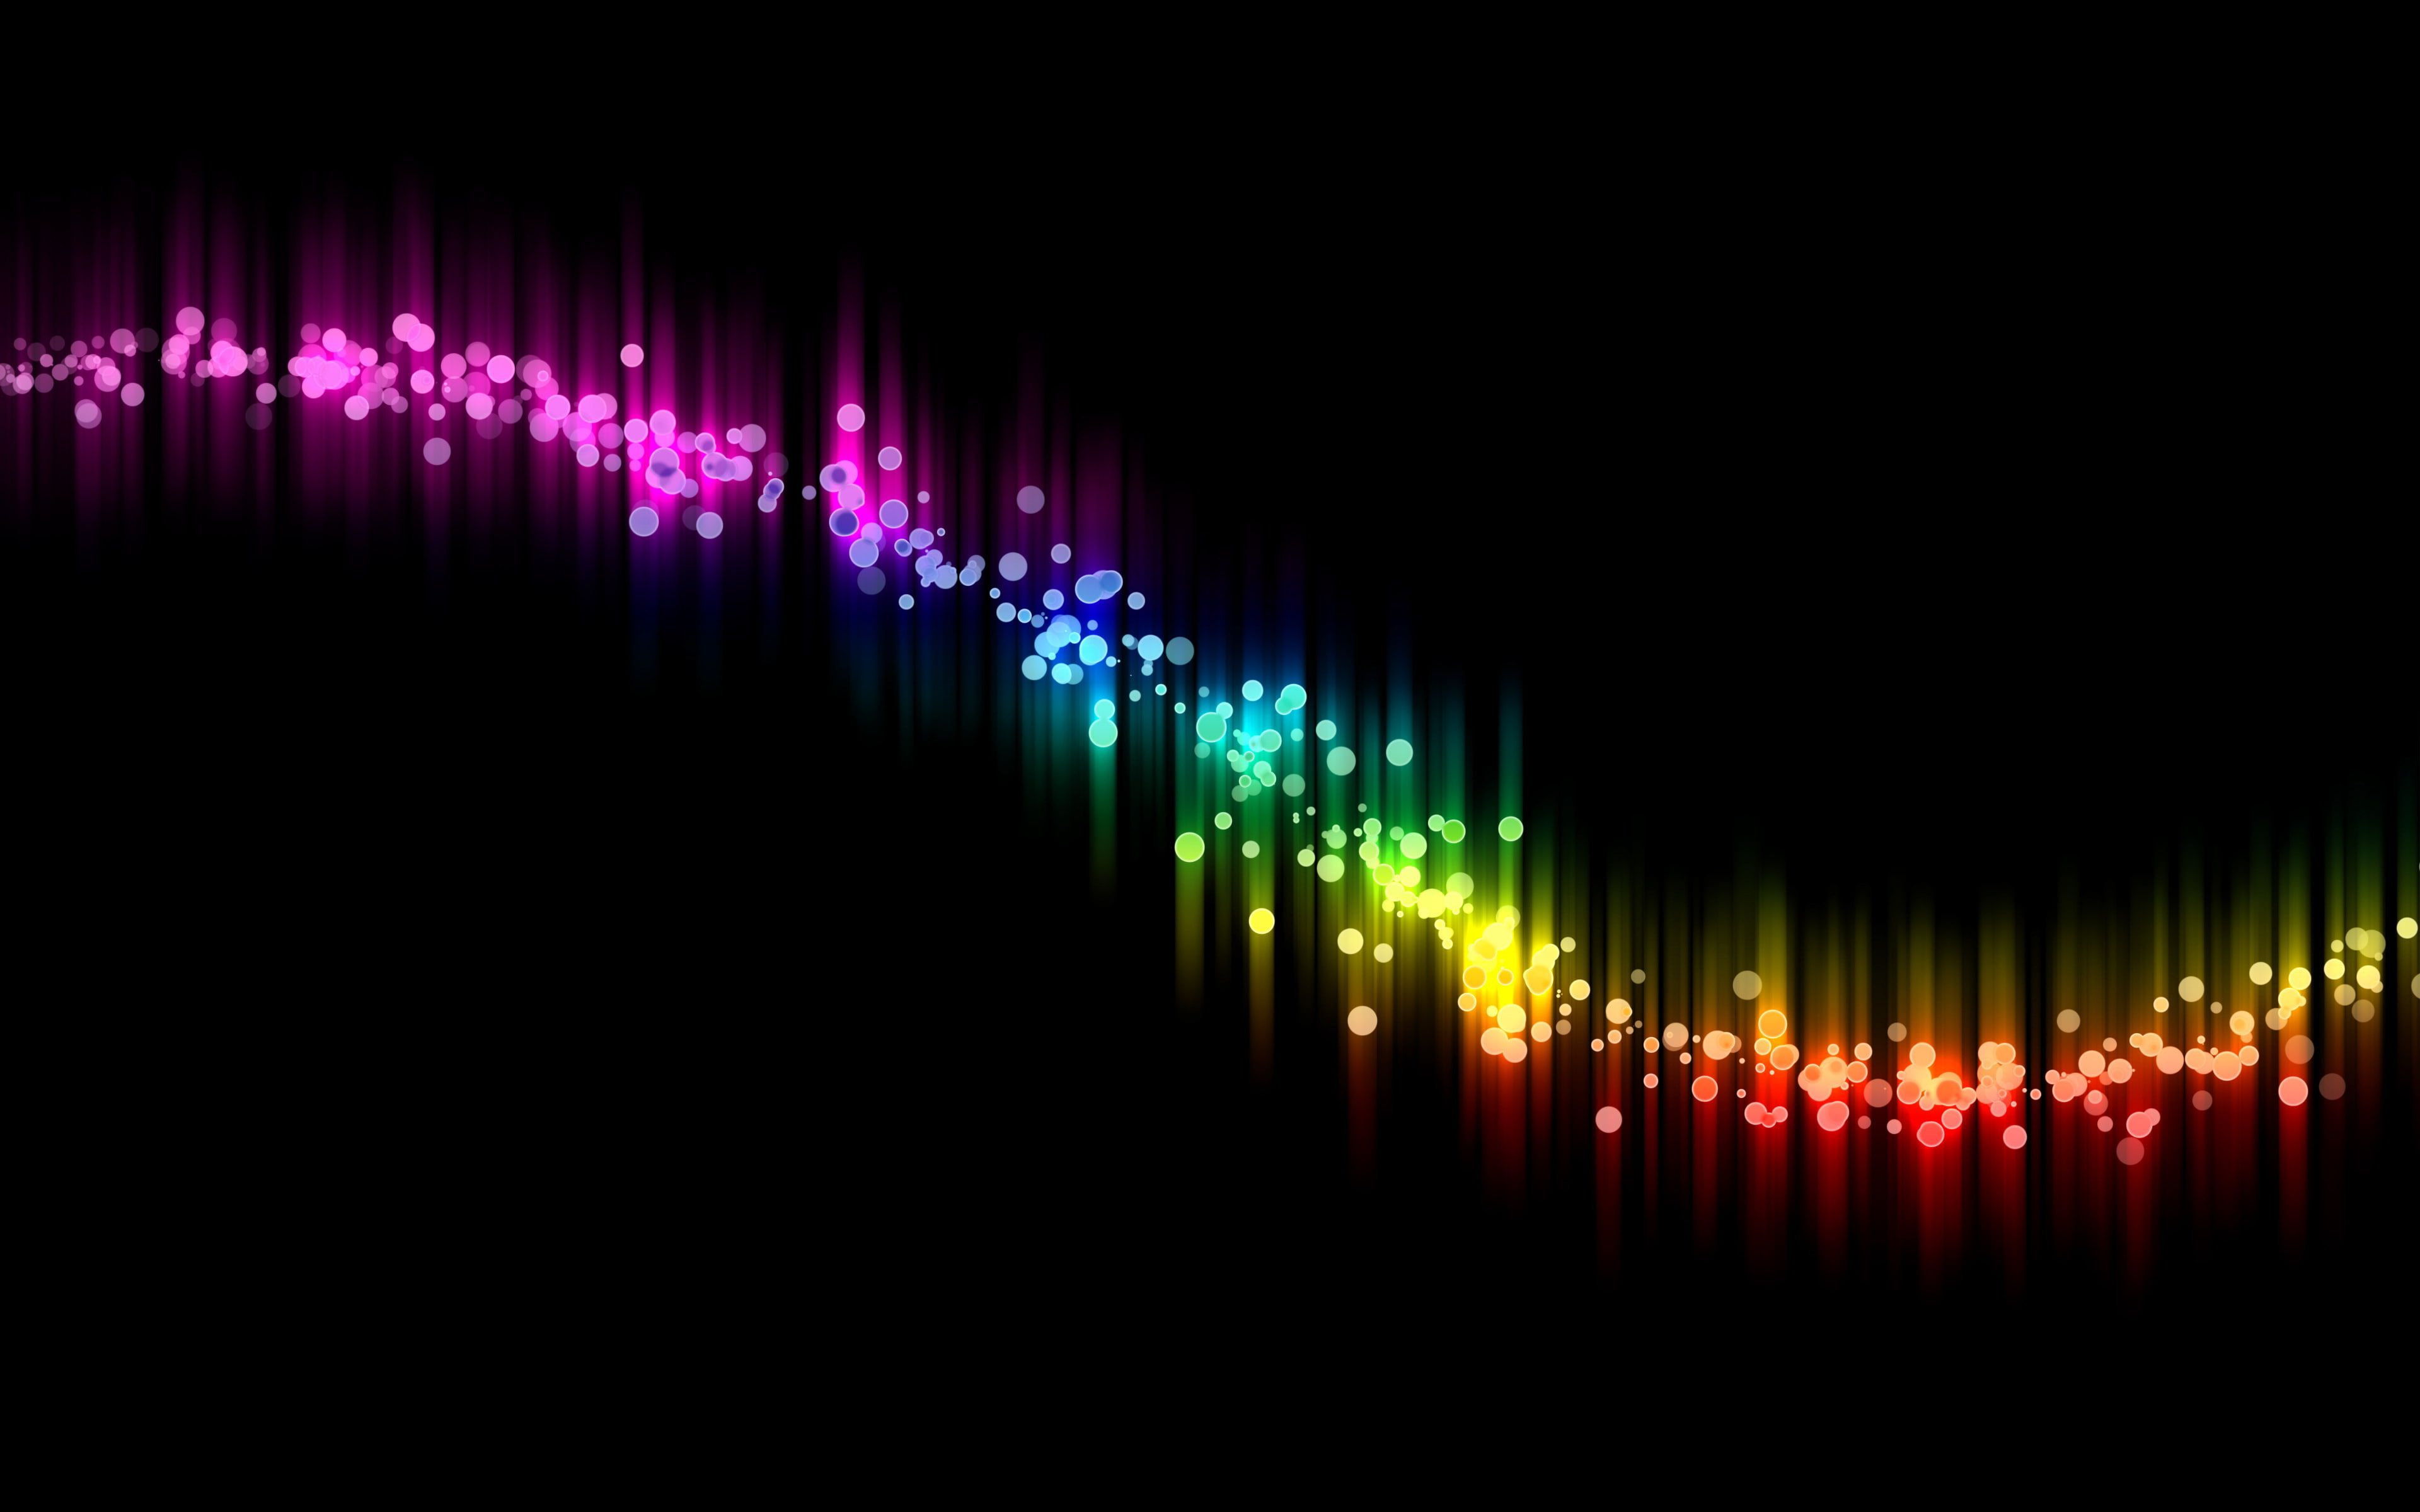 HD wallpaper: Spectrum, Color, Glow, Black Background, pink, blue and yellow lights illustraion